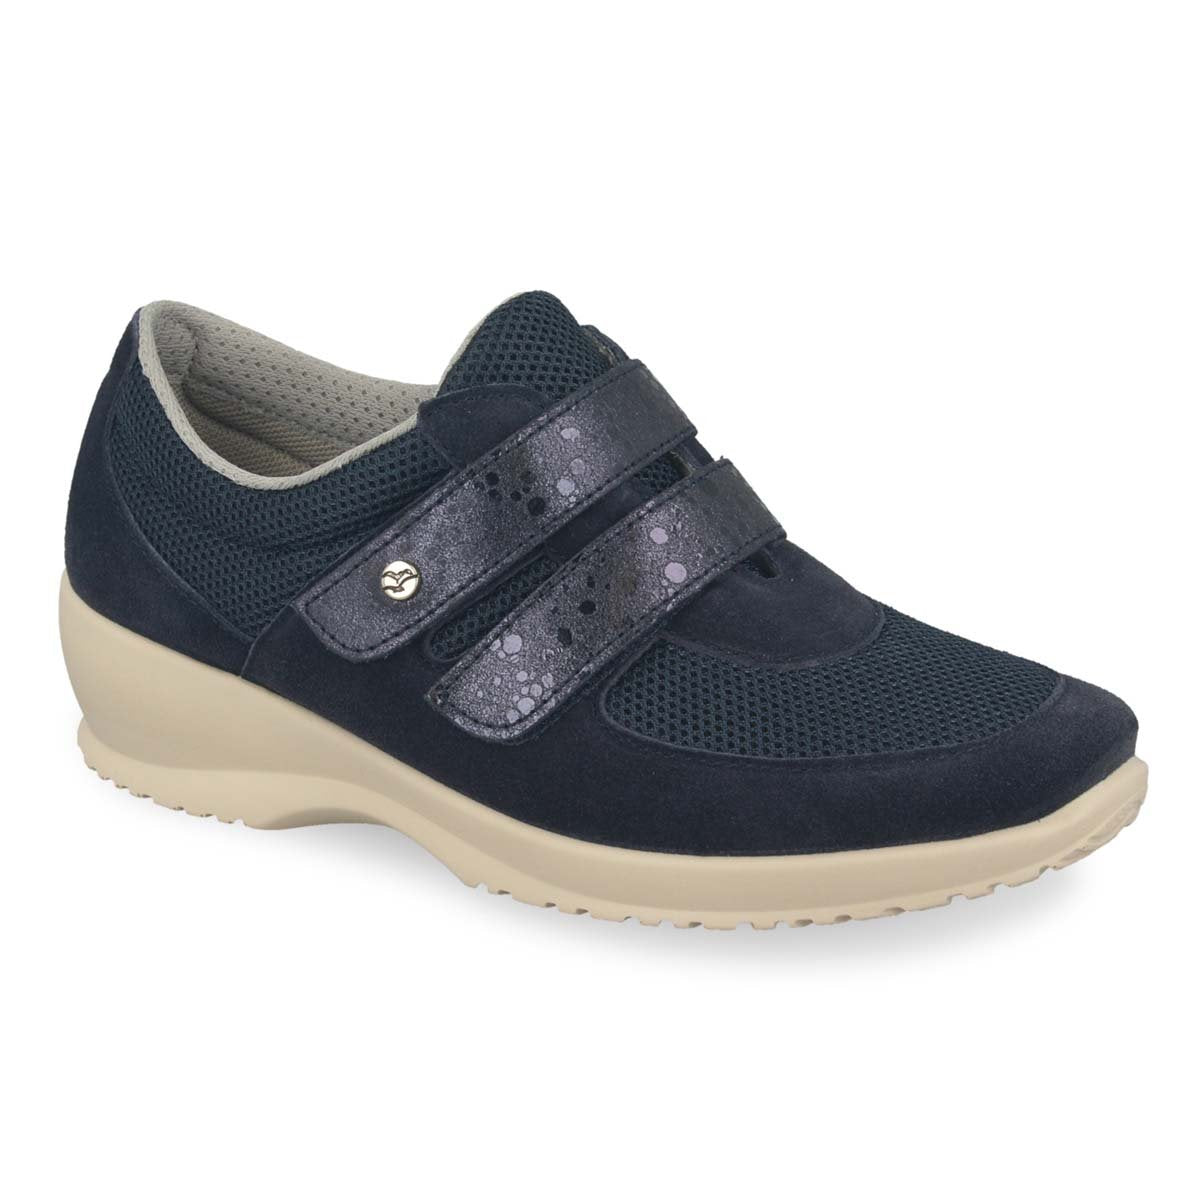 See the Cloth Leather Velcro Strap Sneakers Women Shoes in the colour DARK BLUE, available in various sizes